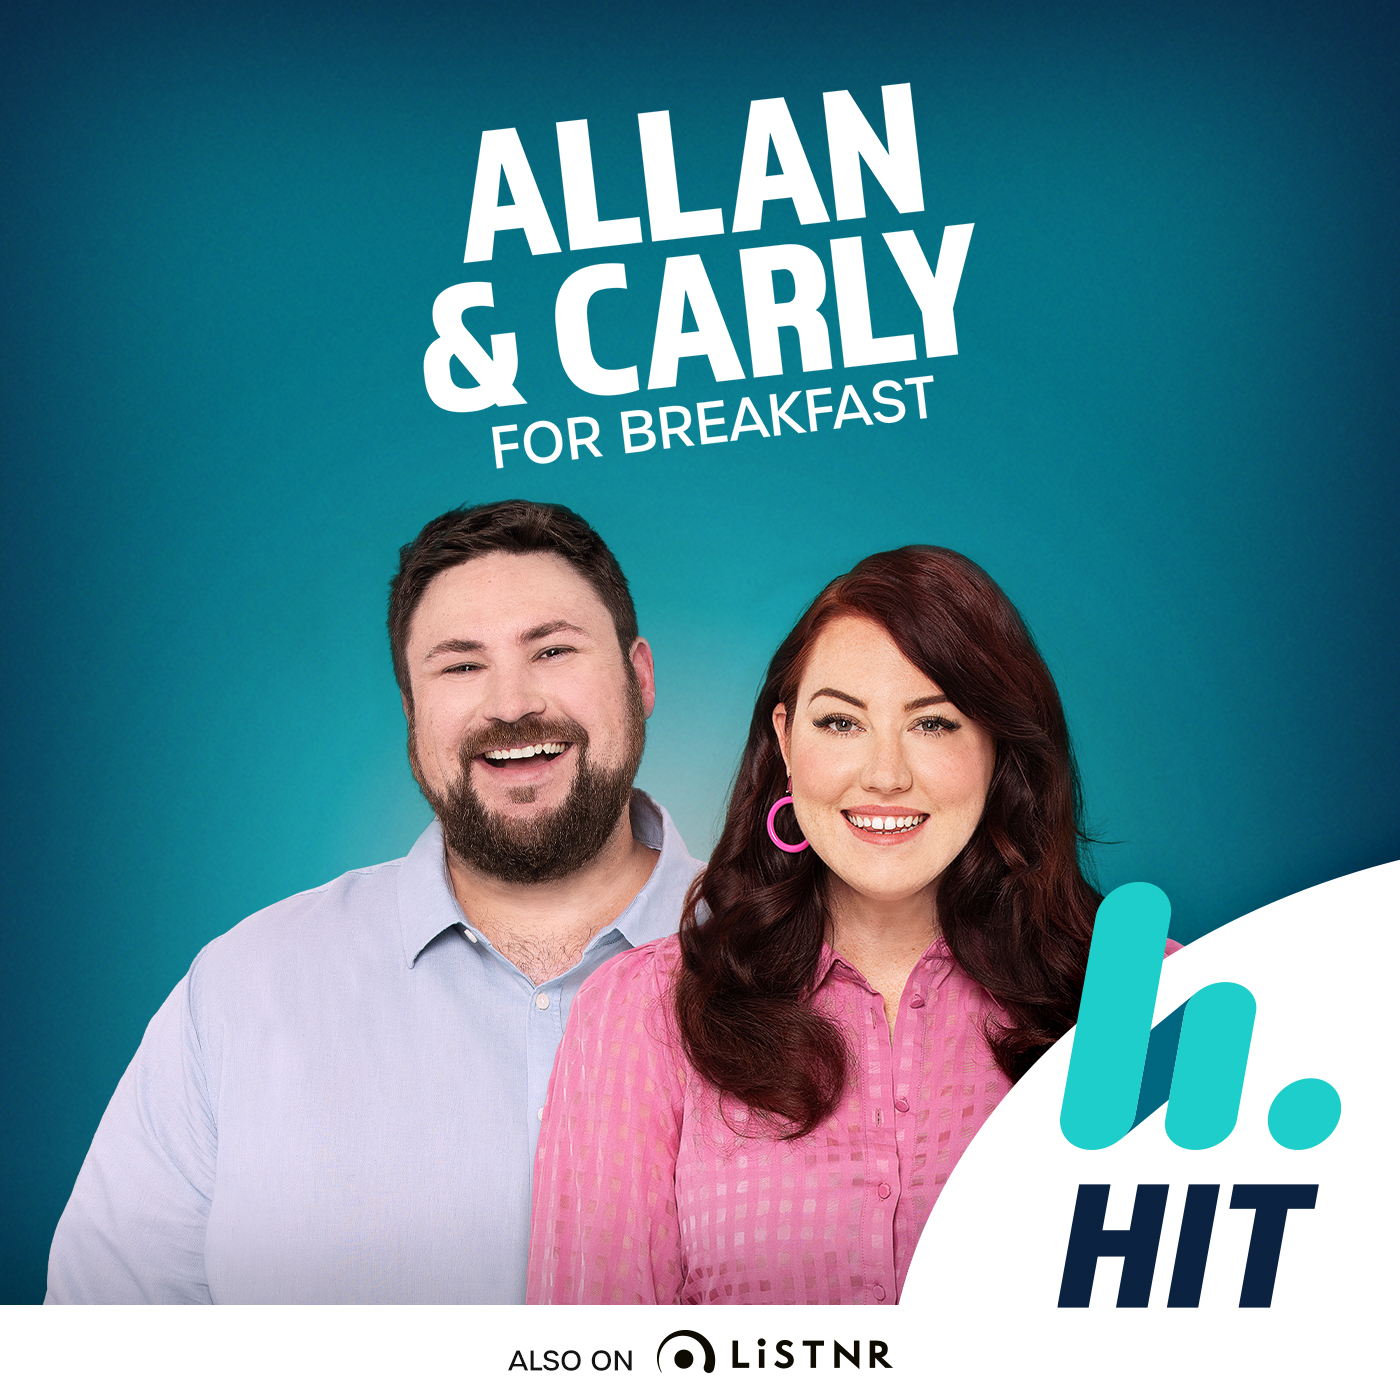 Allan & Carly: Renovation Horror "I Had To Lay There For Three Hours"